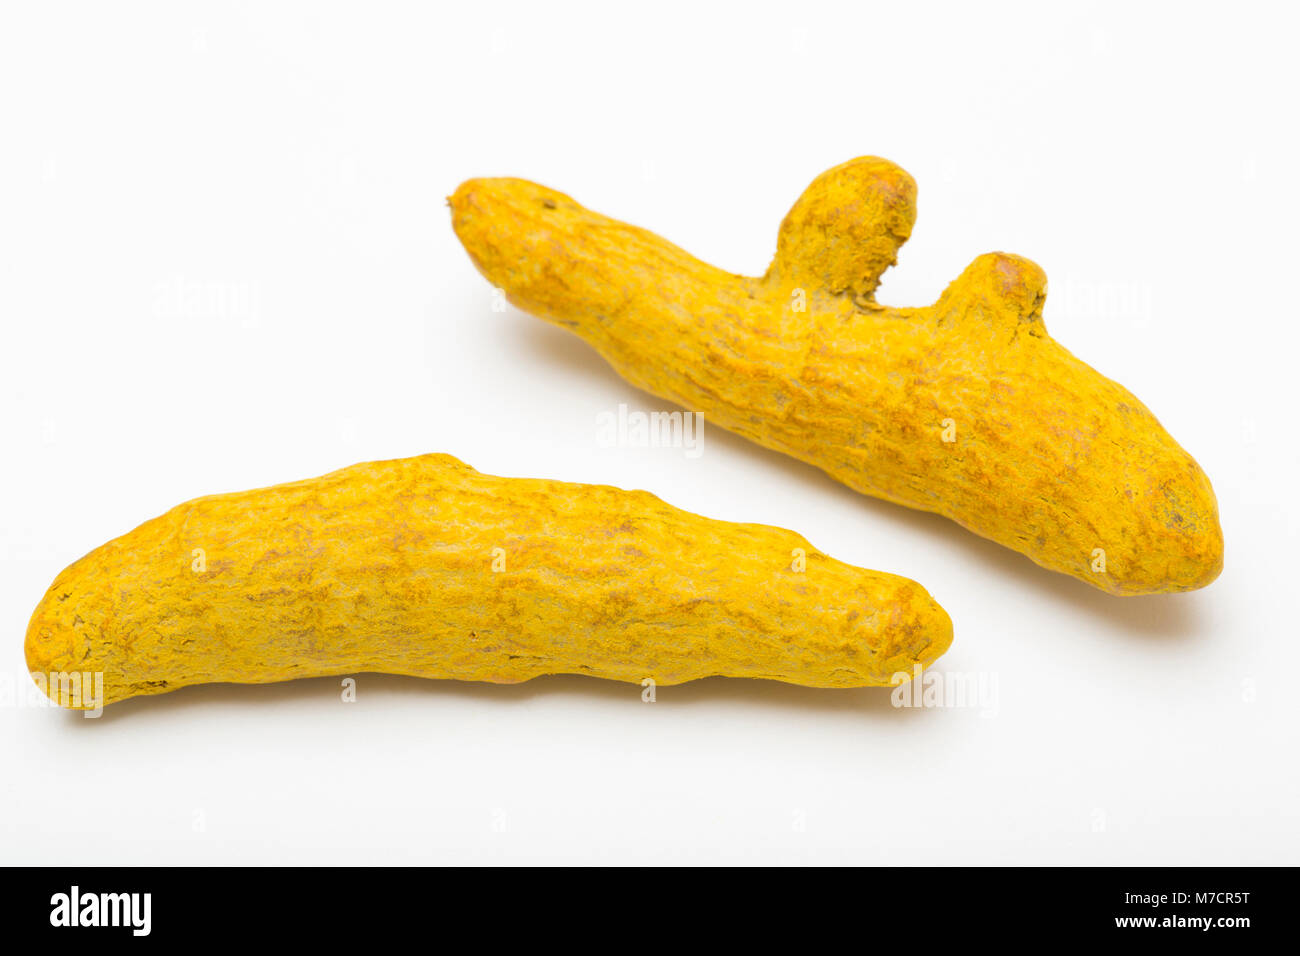 Dried turmeric root-Curcuma longa, bought from a shop in the UK and photographed in a studio. England UK GB Stock Photo